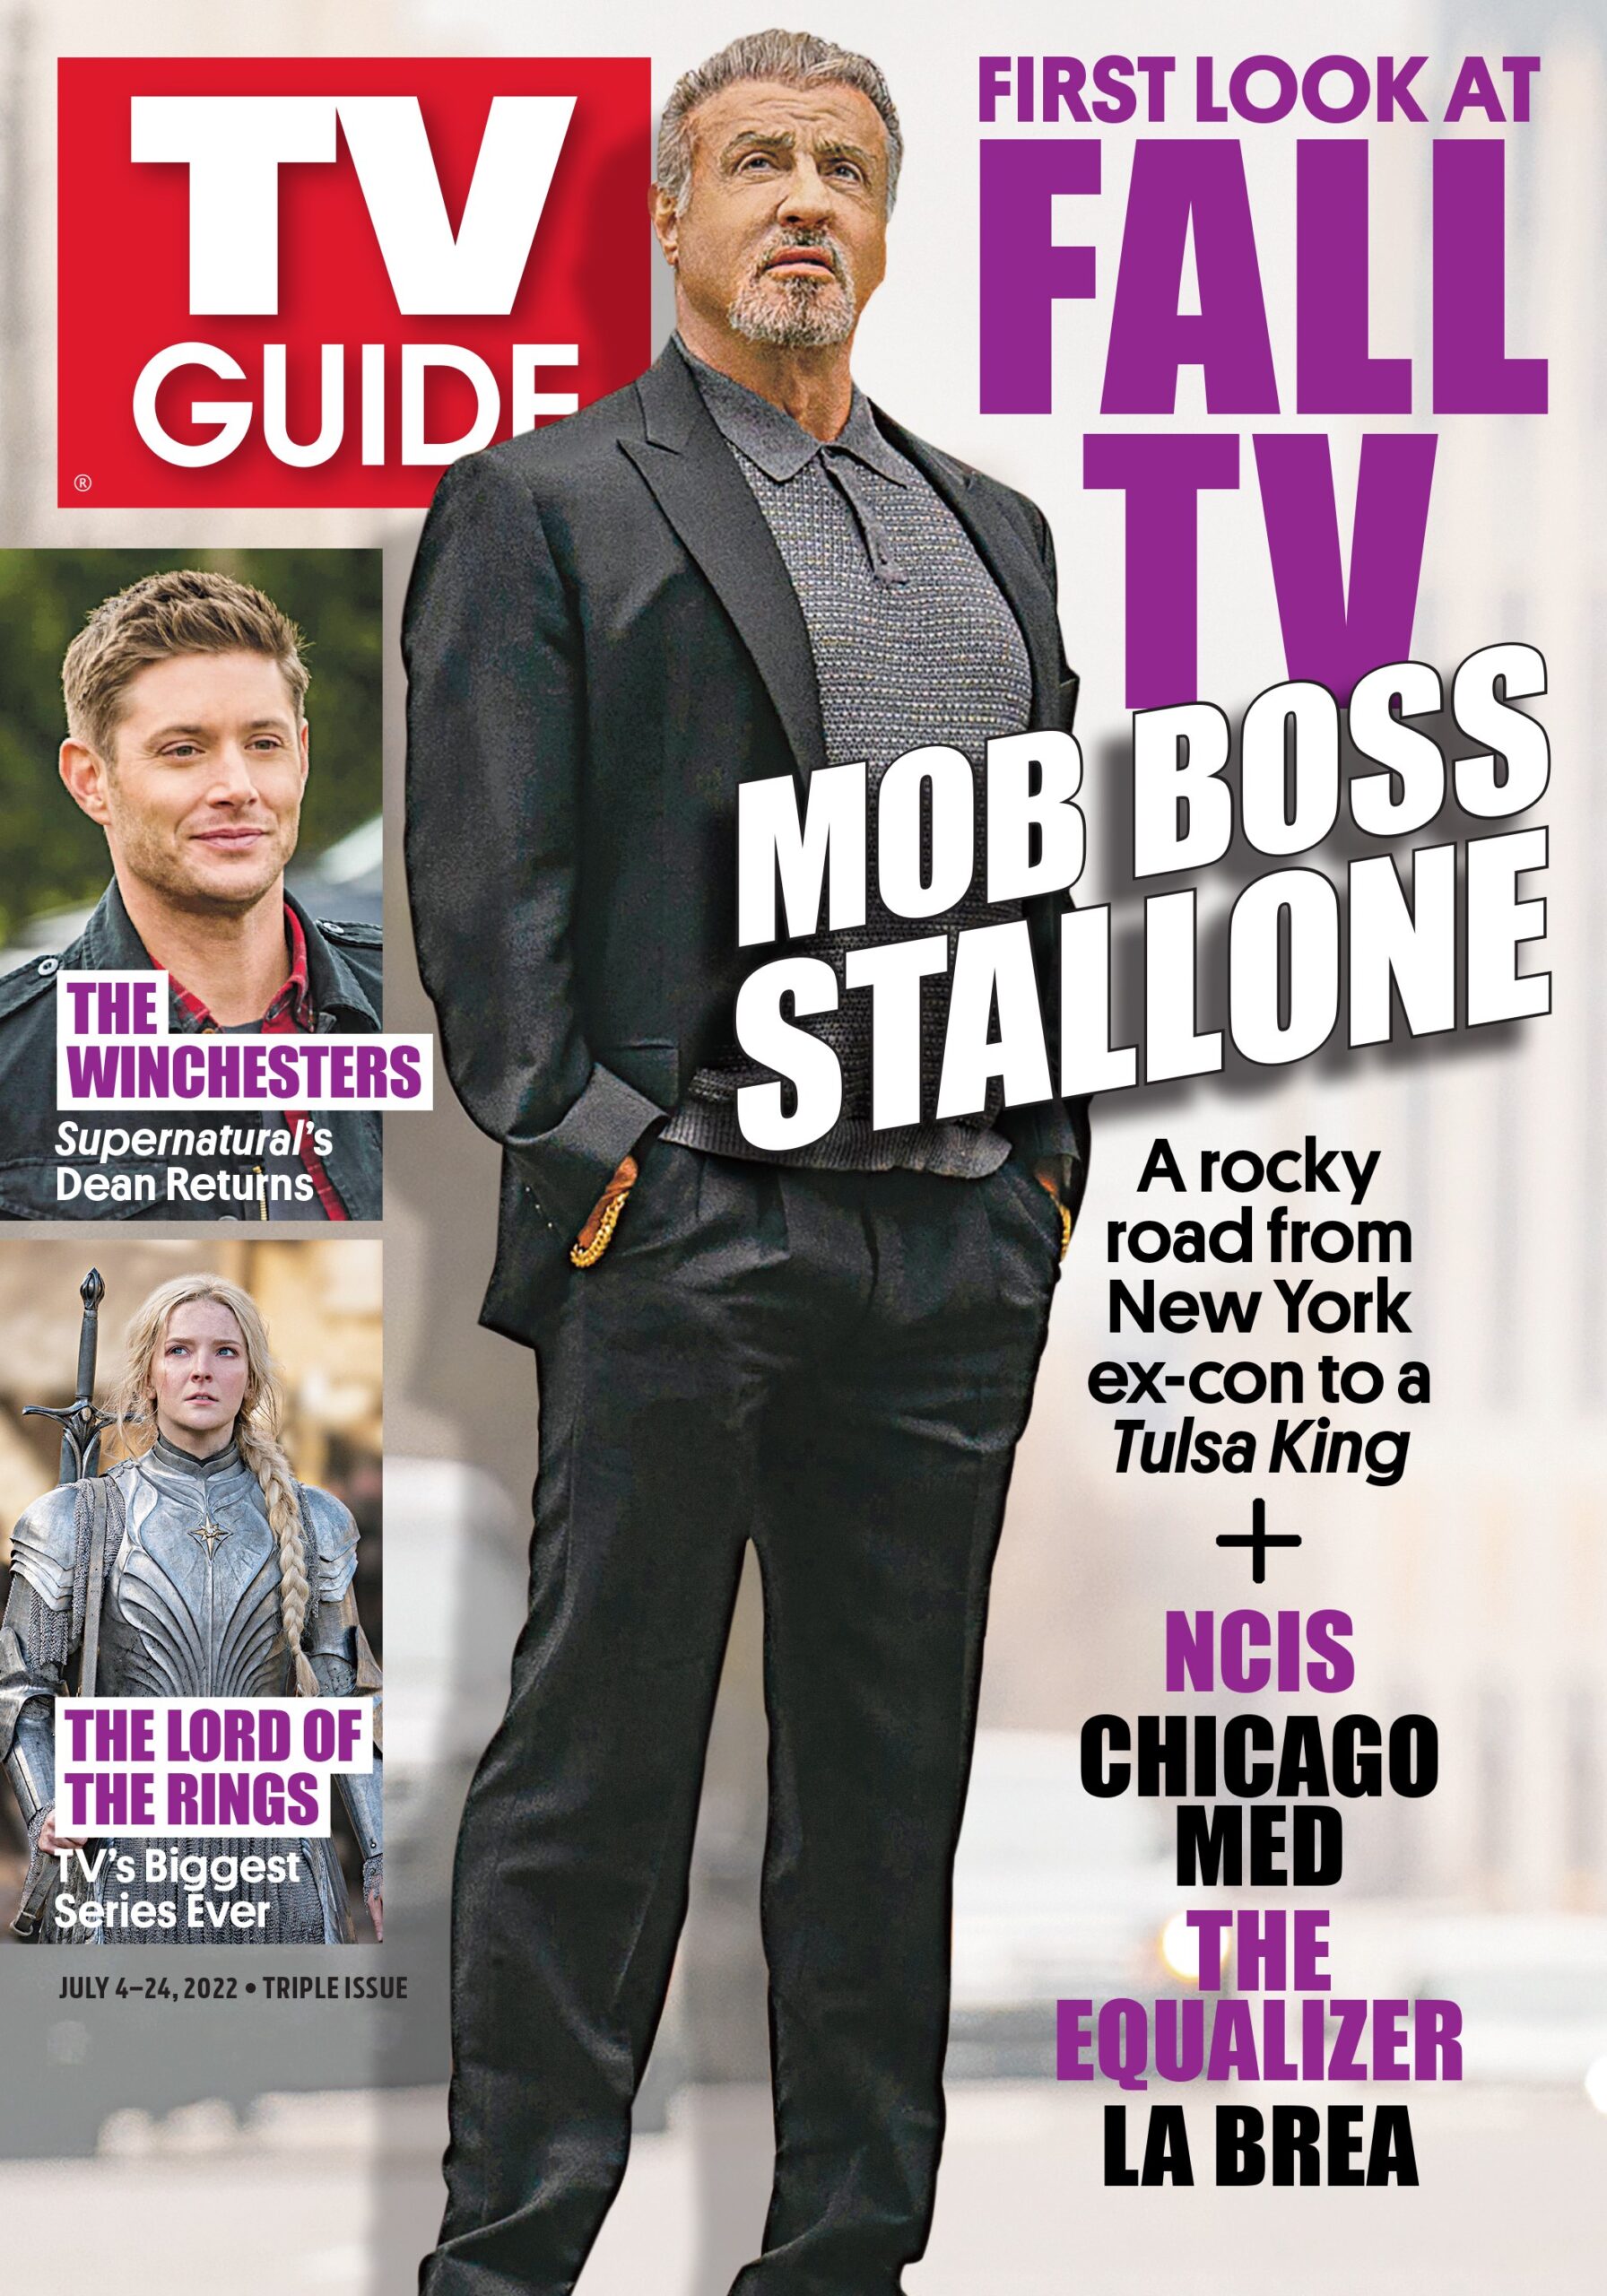 FIRST LOOK AT FALL TV; THE WINCHESTERS Supernatural's Dean Returns; THE LORD OF THE RINGS TV's Biggest Series Ever; MOB BOSS STALONE A rocky road from New York ex-con to a Tulsa King; +NCIS; CHICAGO MED; THE EQUALIZER; LA BREA